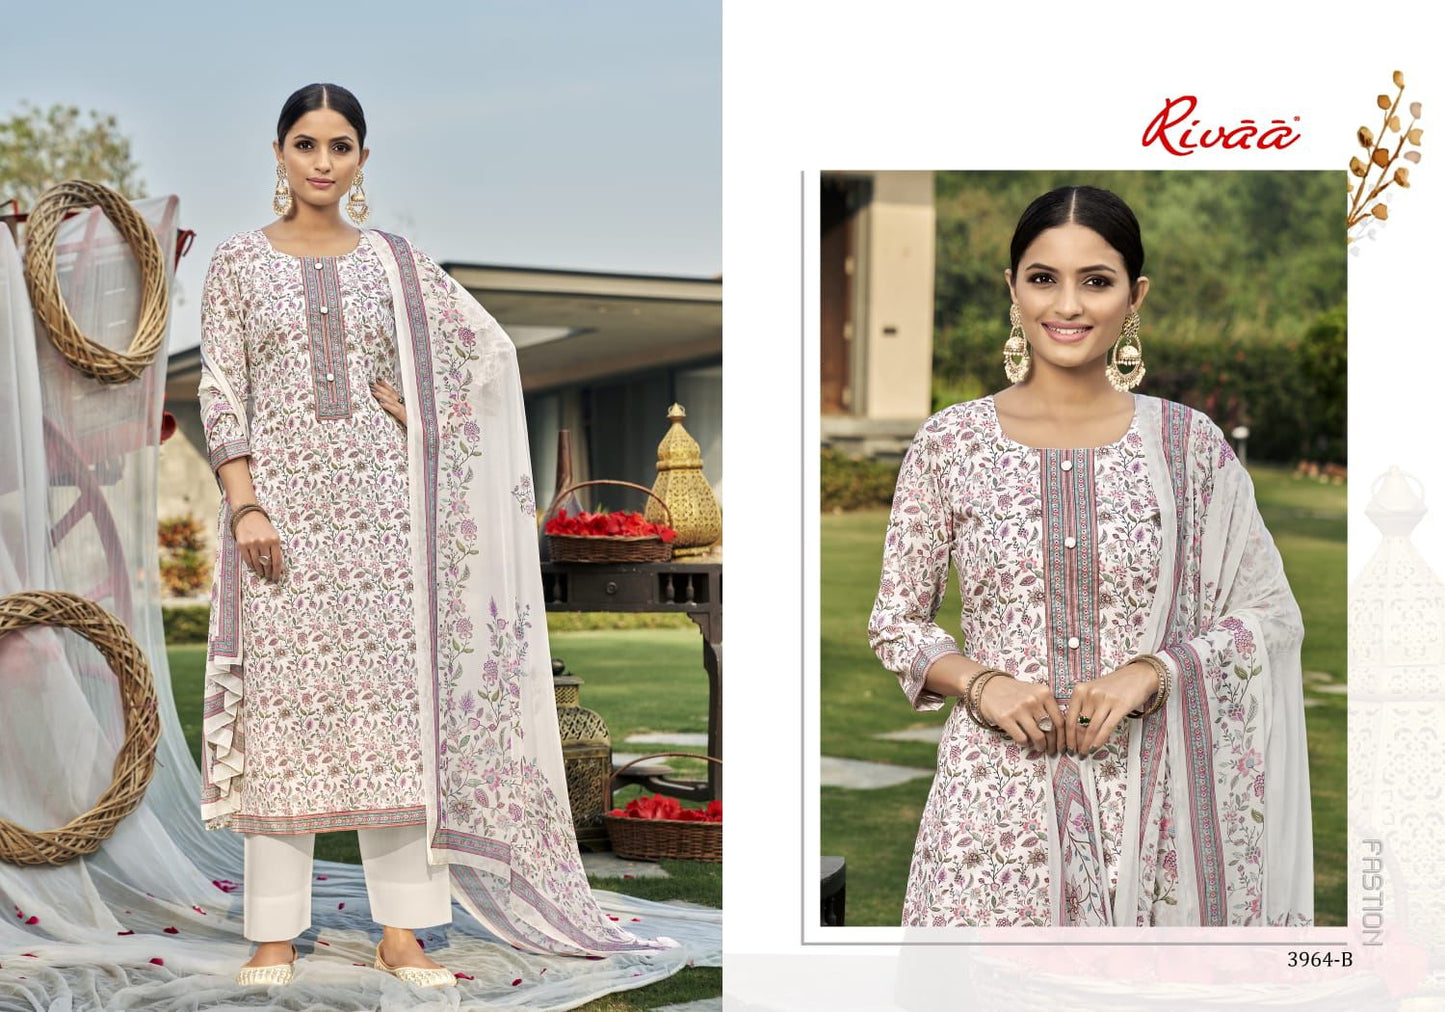 Naina 3 Rivaa Cotton Pant Style Suits Manufacturer